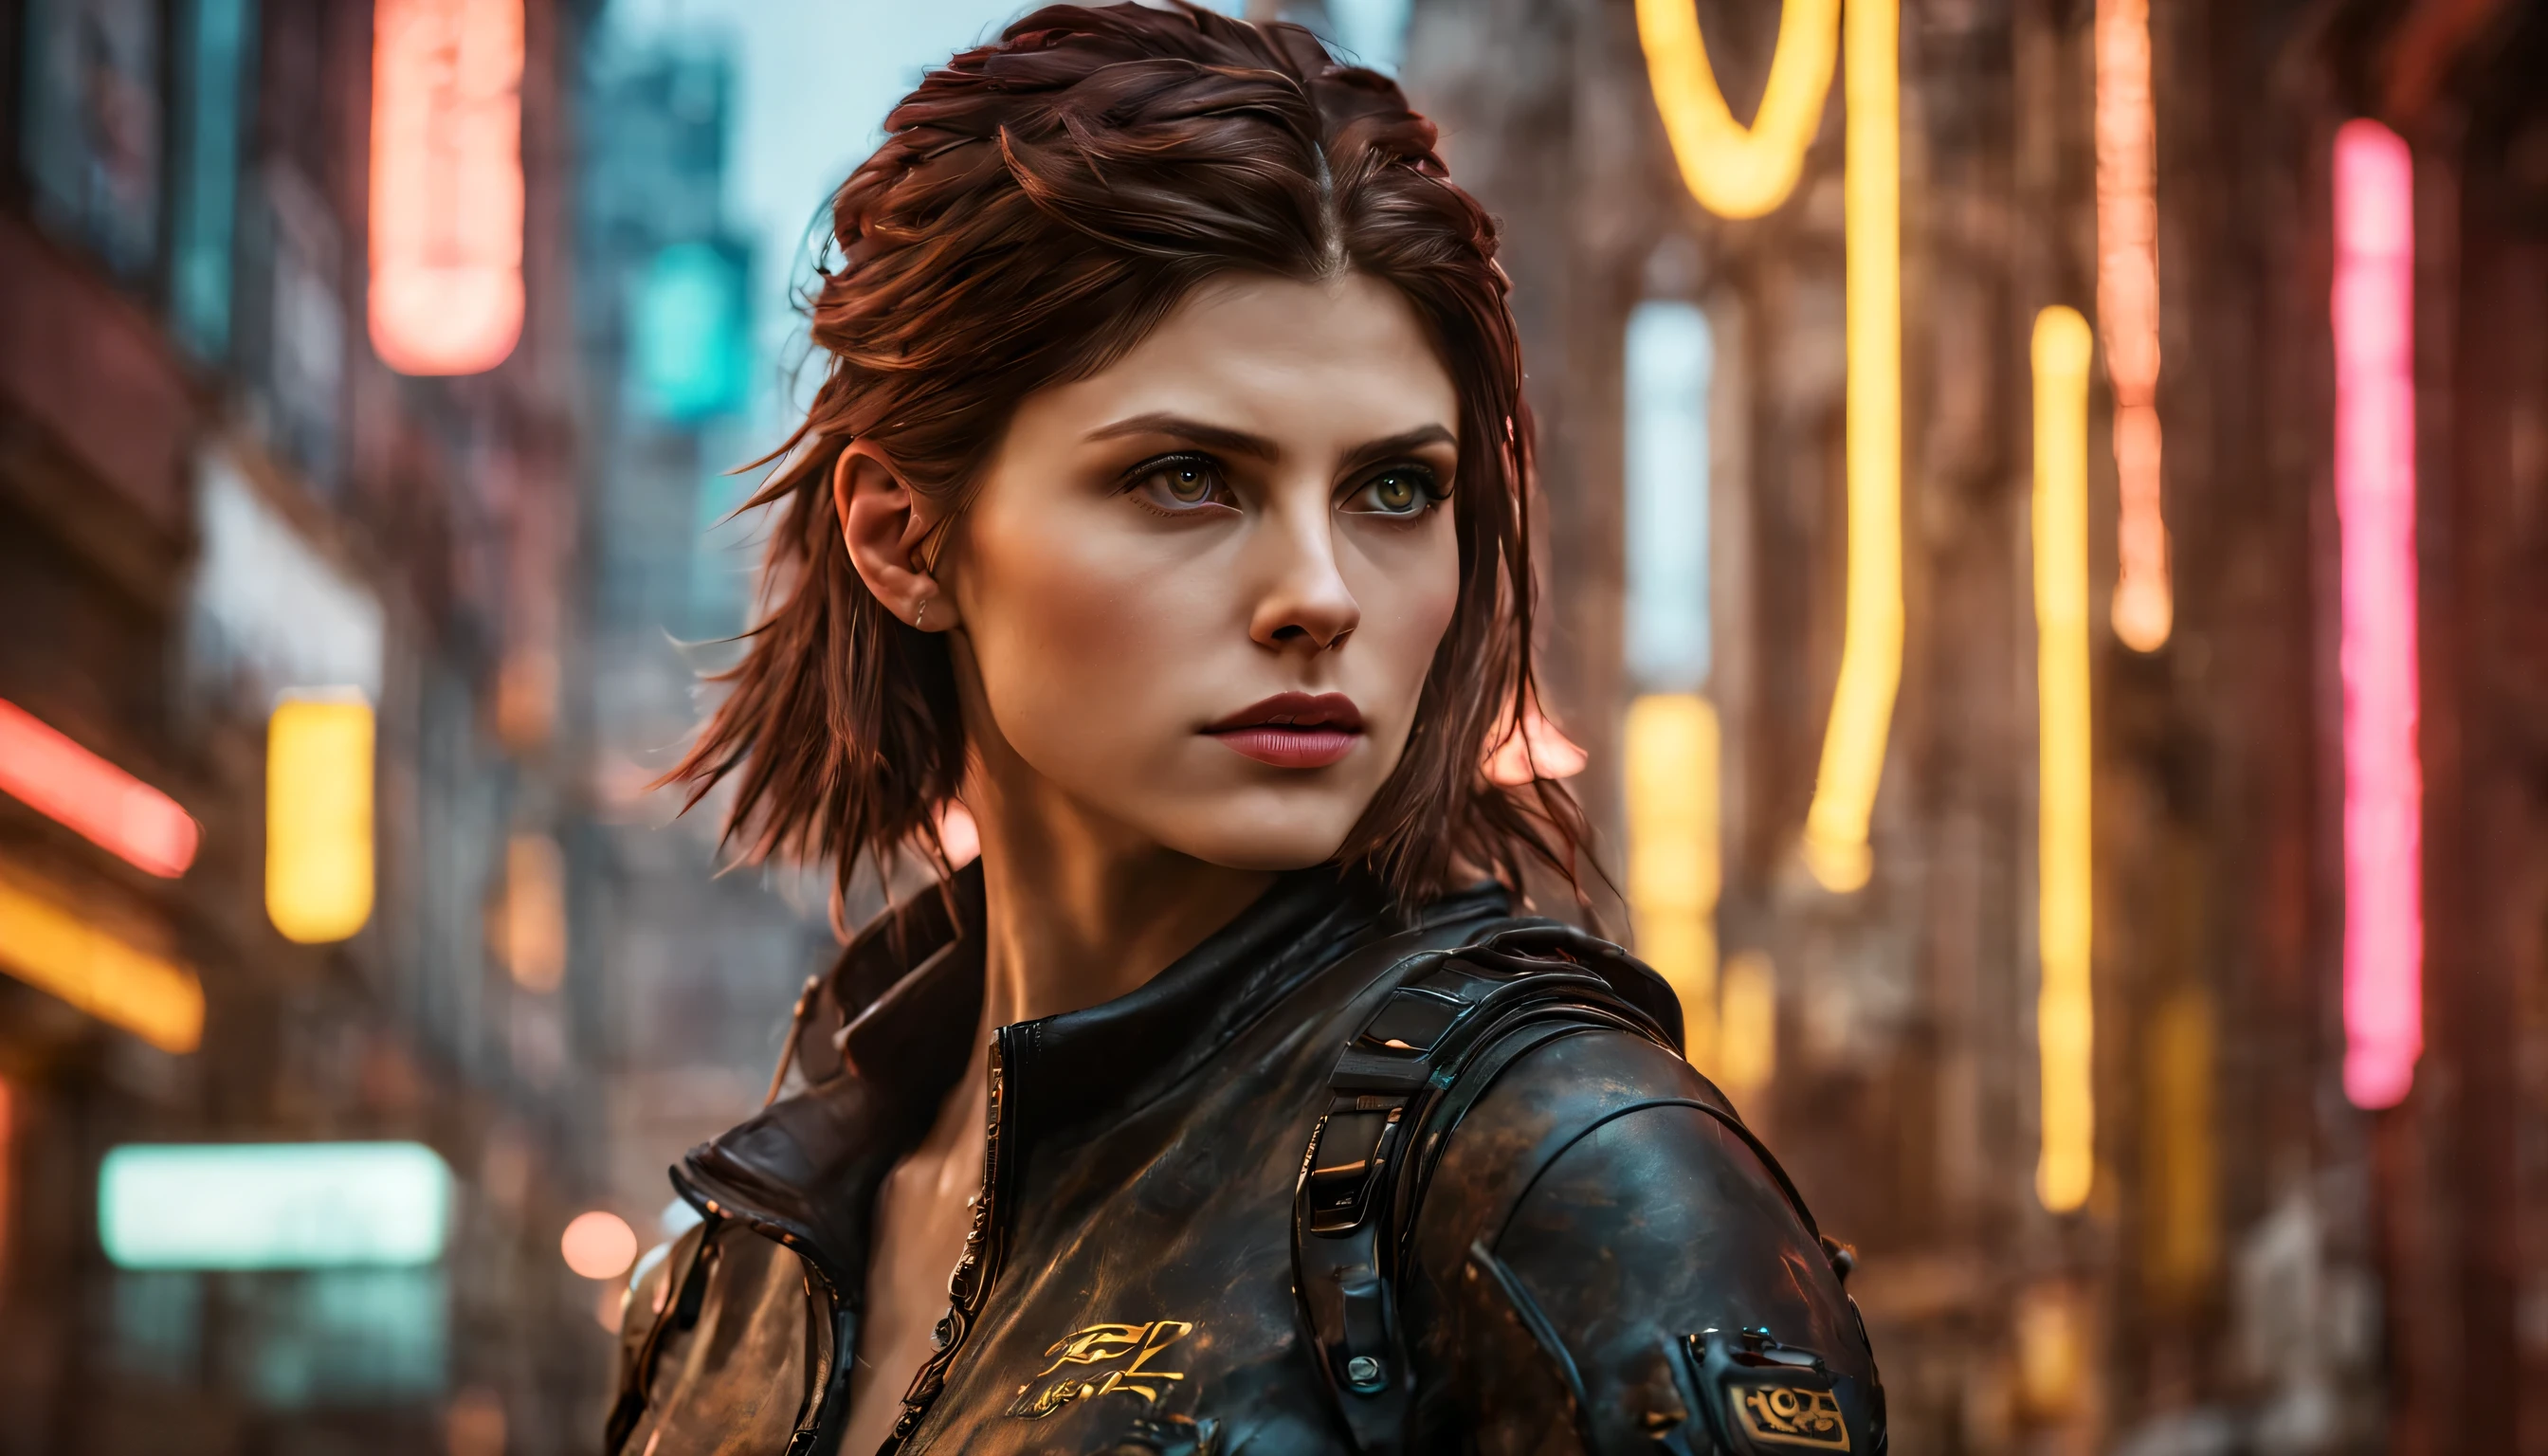 close-up portrait of an Alexandra Daddario lookalike, Detailed character concept art, Inspired by, realisitic, fantasy character, unreal motor 5, RPG style, Trends on ArtStation, Quality of CGSociedade, background bokeh, softfocus, 35mm lens, complex leather texture, cyberpunk clothing, confident looking, artwork style, ((masterfully crafted clothes, expressive eyes, strong posture), professional photograpy, Dynamic Posture, High fidelity textures ), attractive colors, volumetric neon lightning, vivid neon lights, bright coloured, close photo at eye level, High definition, high fidelity effects, Octane rendering, nintendo art, Captura de tela inspirada em Infamous First Light e Cyberpunk 2077, cloused mouth, cinematic lighting, Photo at eye level, canon, Sony FE, Fujifilm, Nikon, Sony FE GM, Depth of field, cinematic lighting, reflection light, Ray tracing, moderno, Futurism, super detaill, High details, high qualiy, awardwinning, best qualityer, high resolution, 1080P, High definition, 4K, 8K, 16K, texturized skin, anatomically correcte, precise, UHigh definition